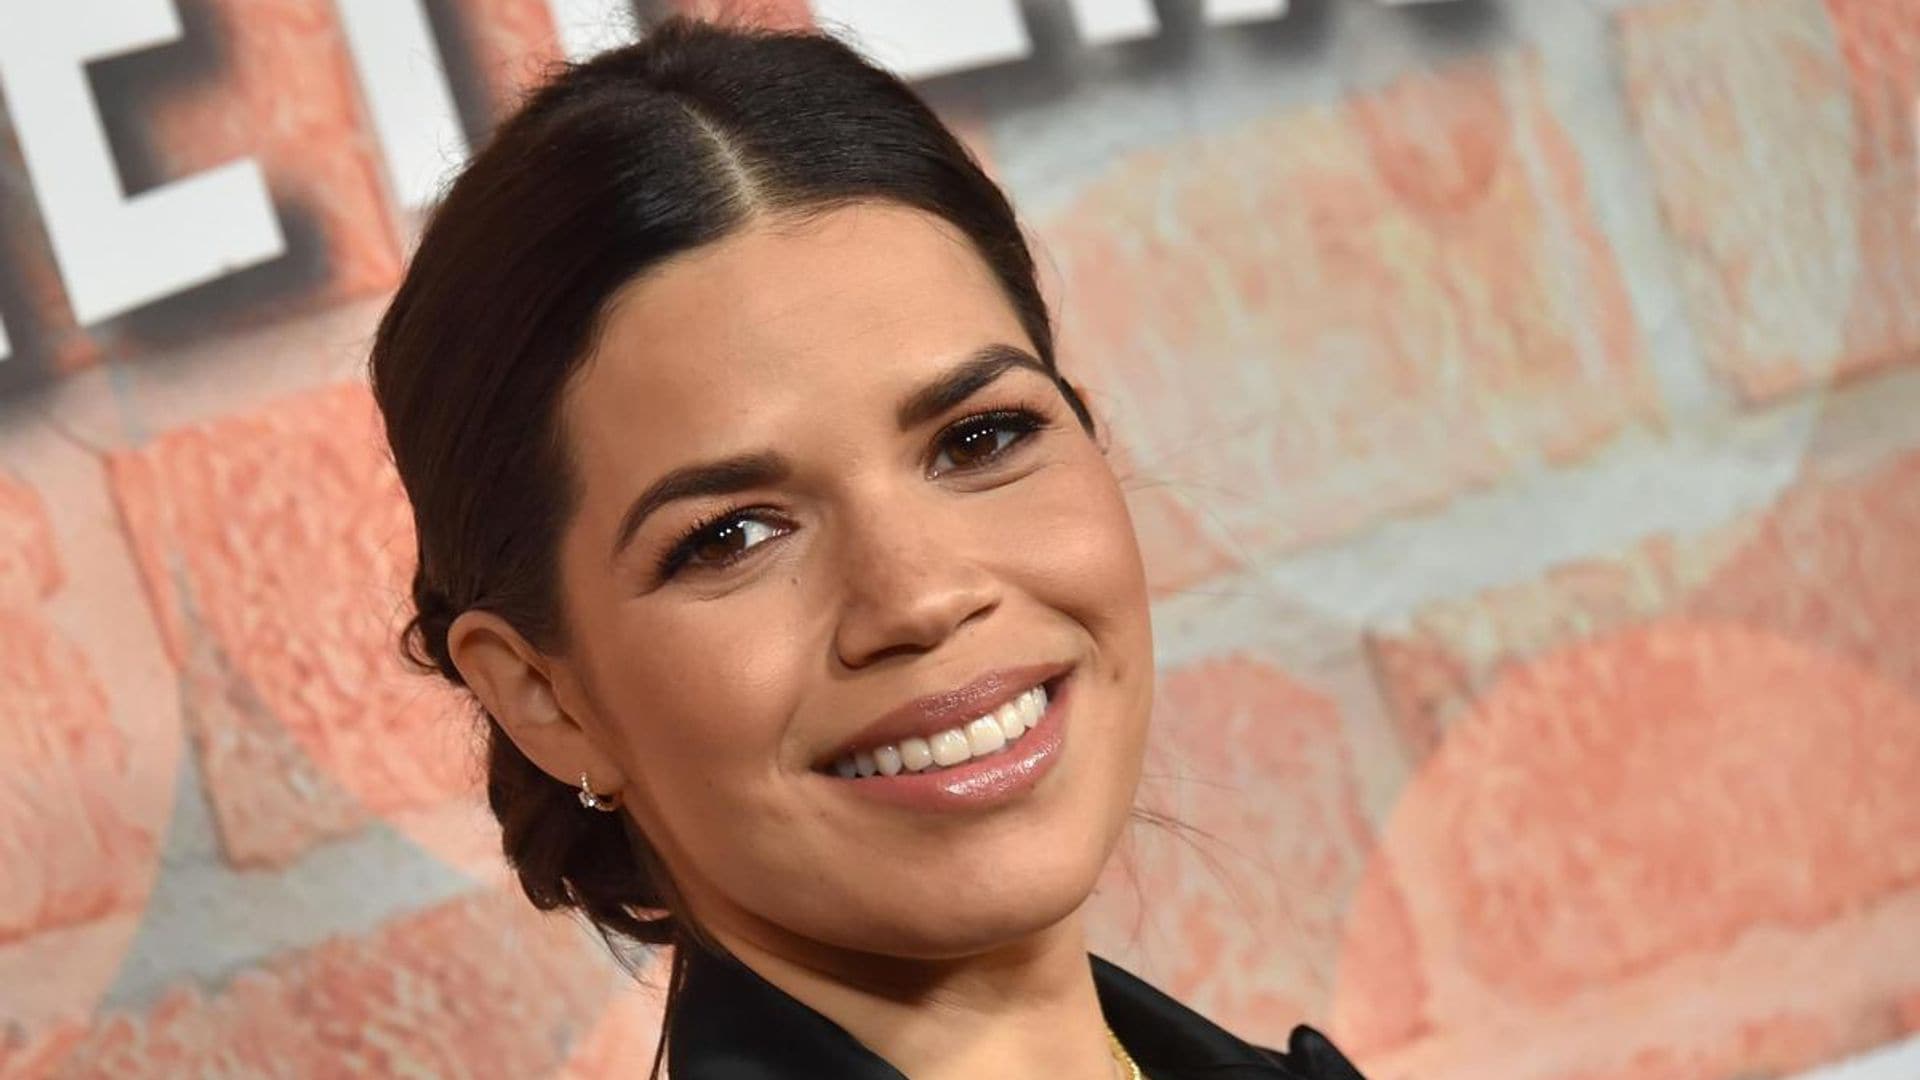 America Ferrera is on the hunt for the lead role in her upcoming Netflix film